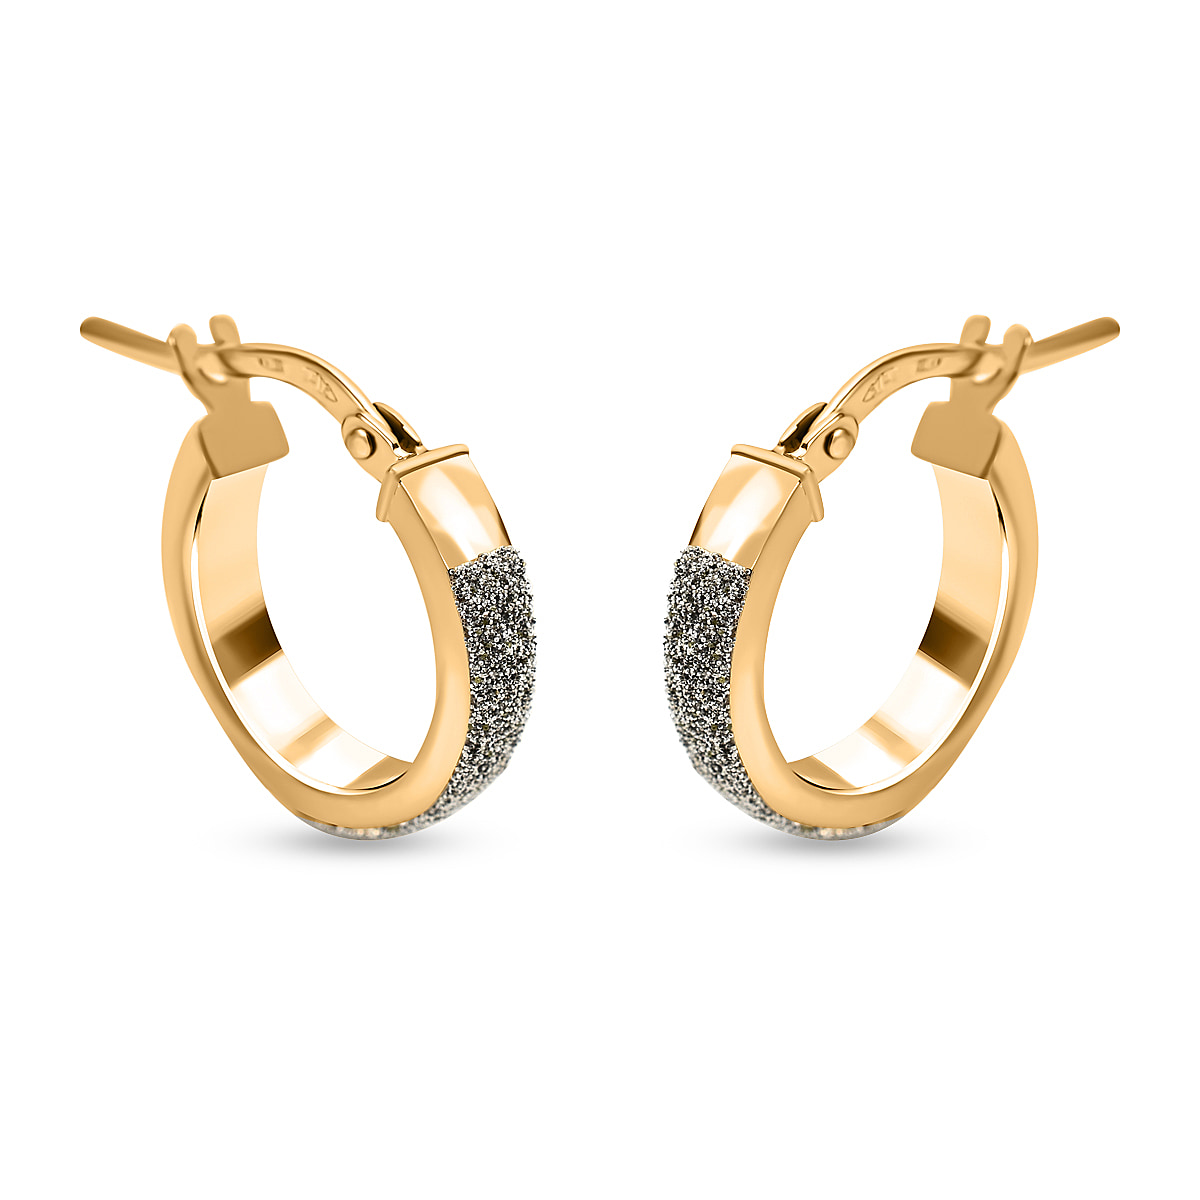 Maestro Collection - 9K Yellow Gold Stardust Hoop Earrings